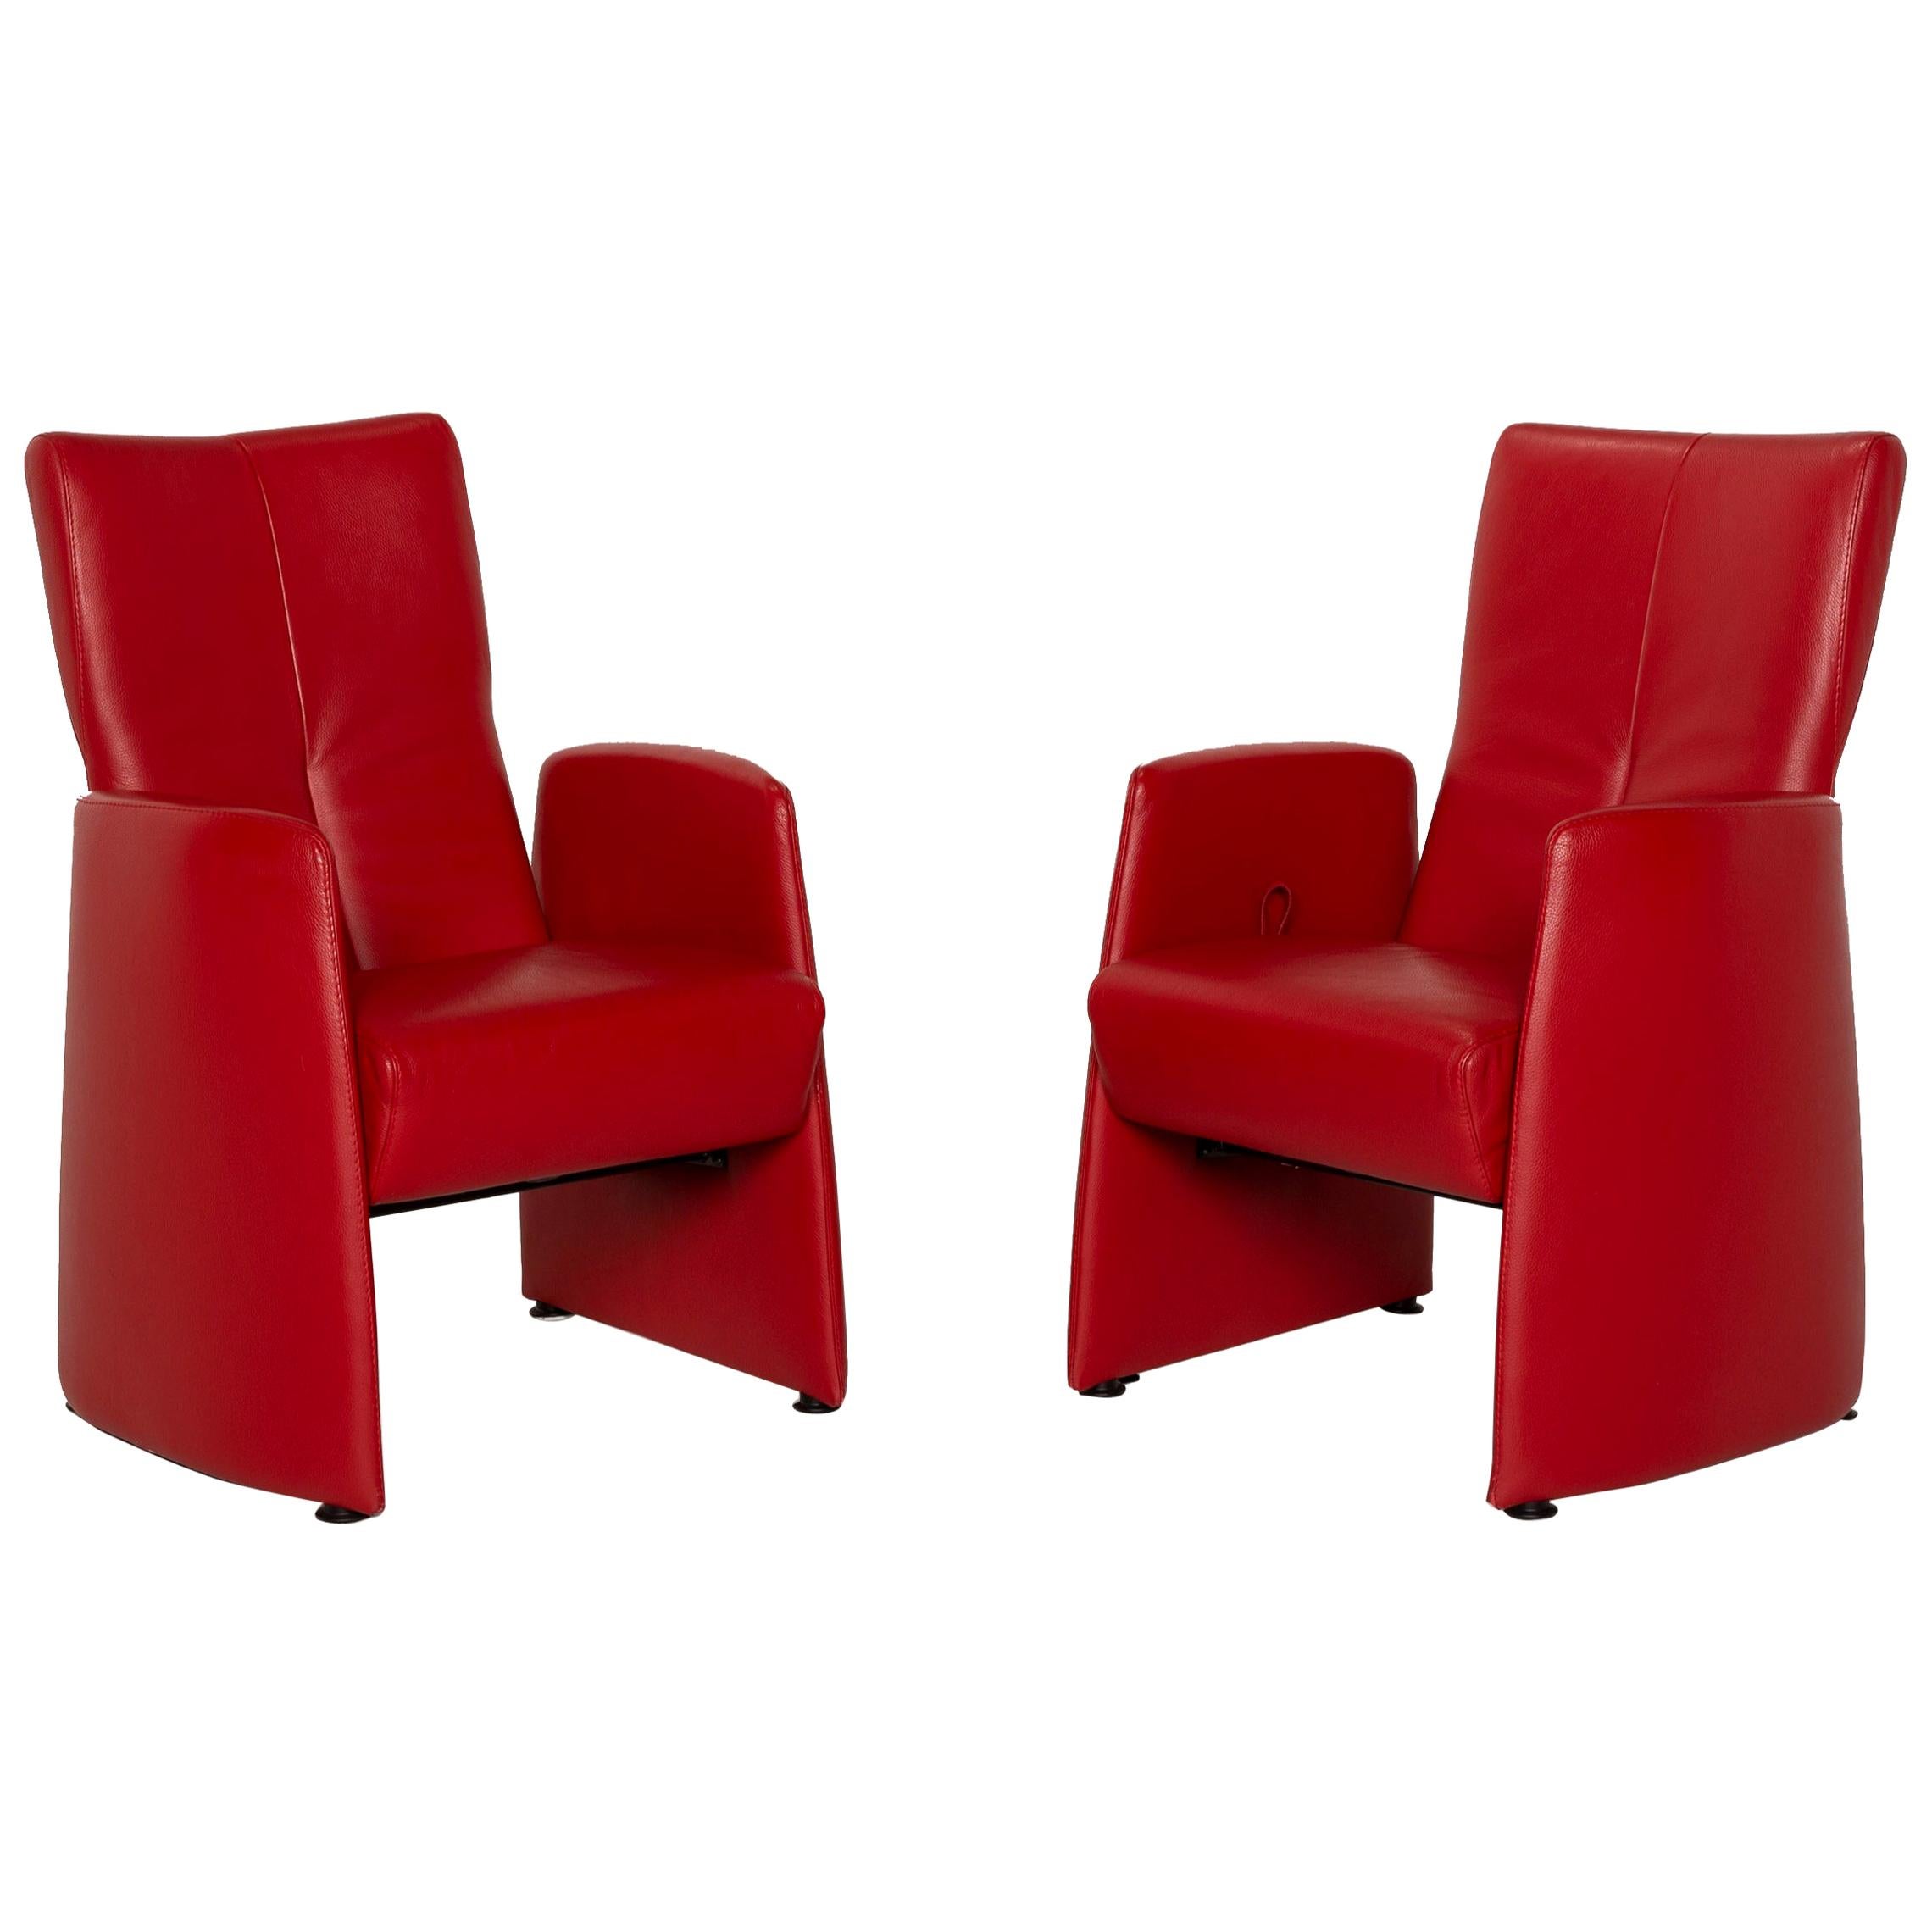 Leolux Leather Armchair Set Red Relax Function Set